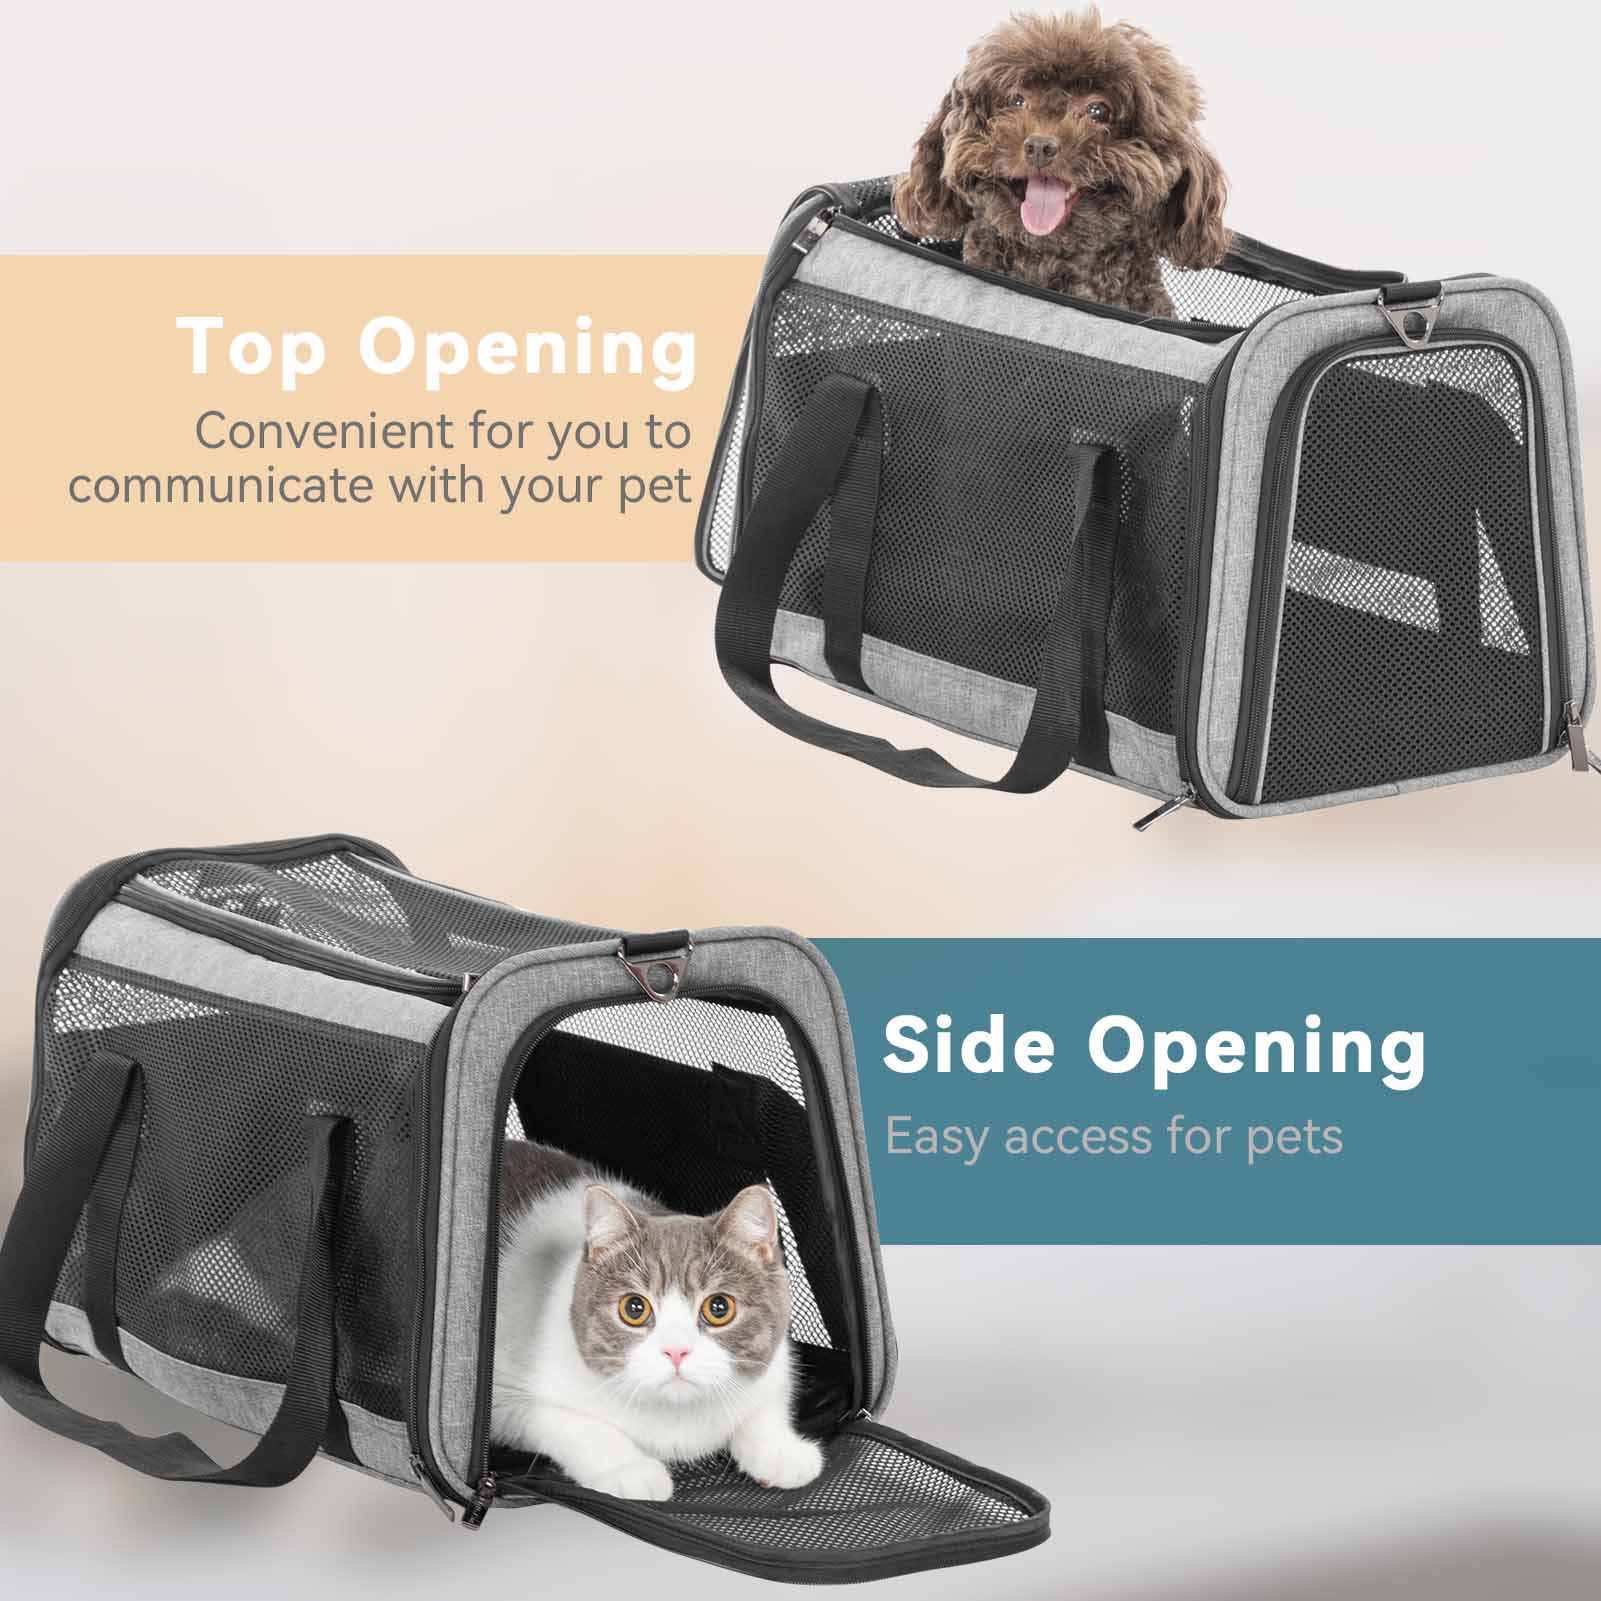 KOOLTAIL Cat Carrier, Large Soft-Sided Pet Travel Carrier, Airline